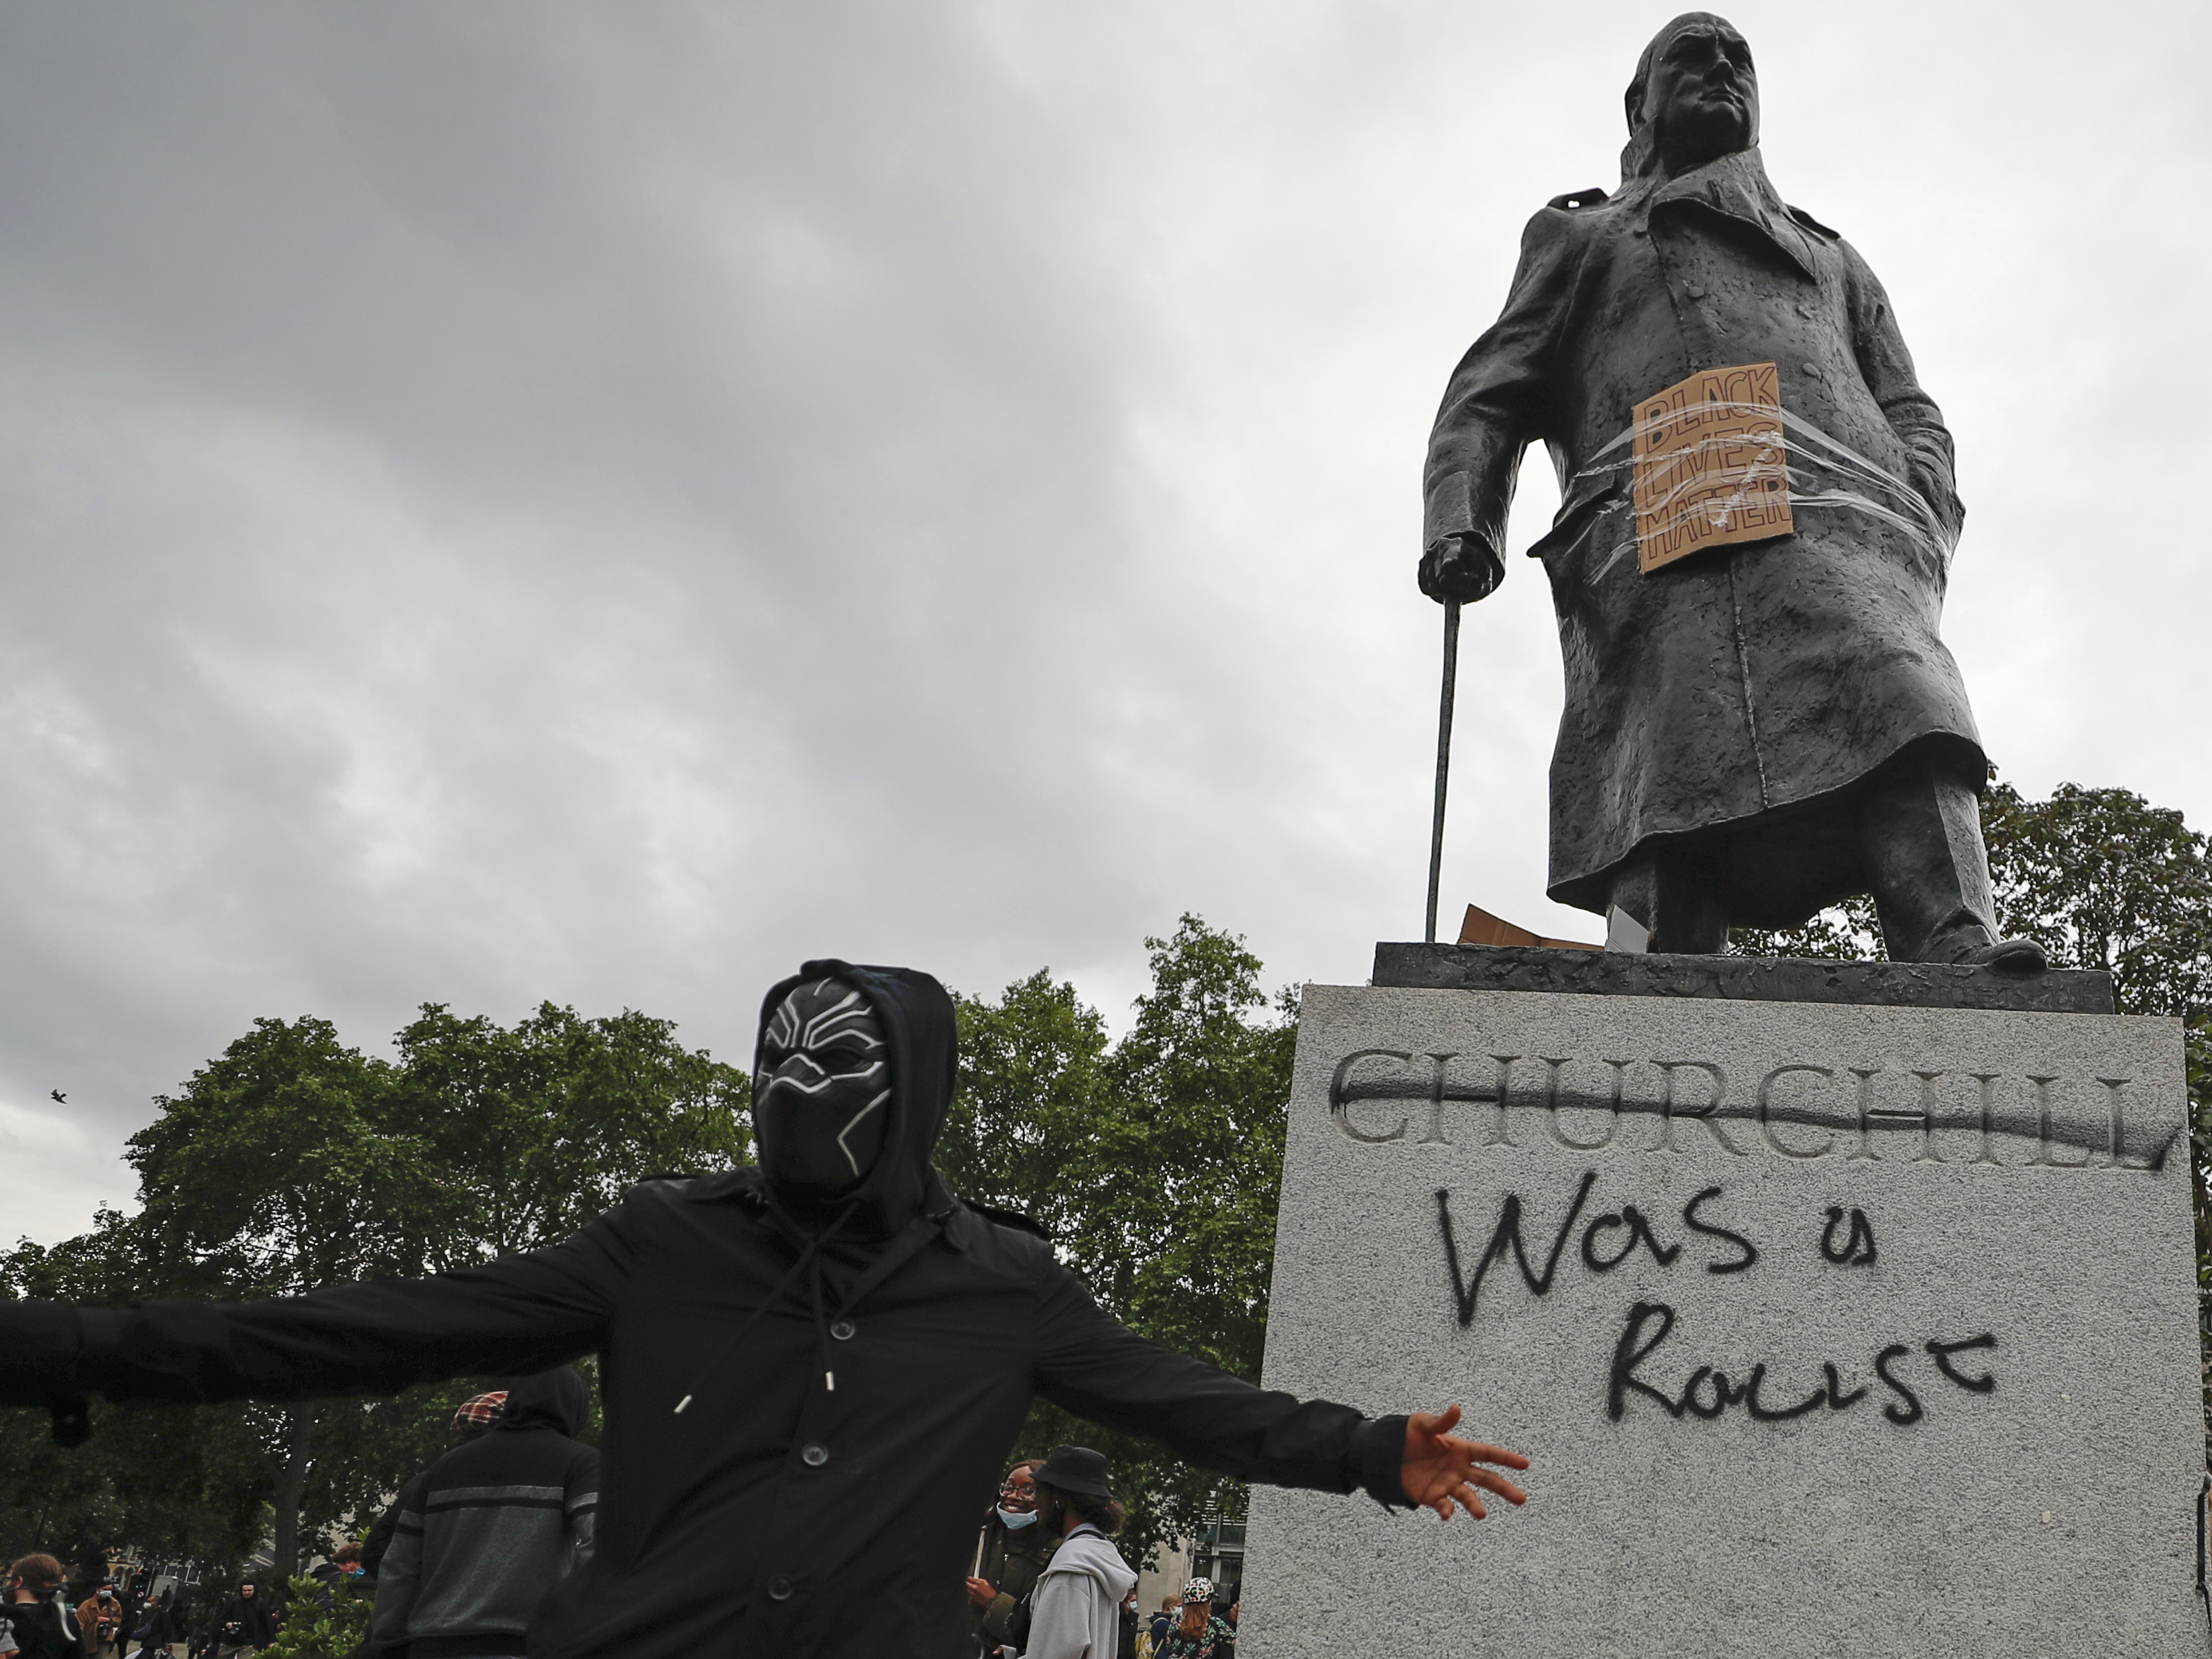 A statue of Churchill was vandalized in London.